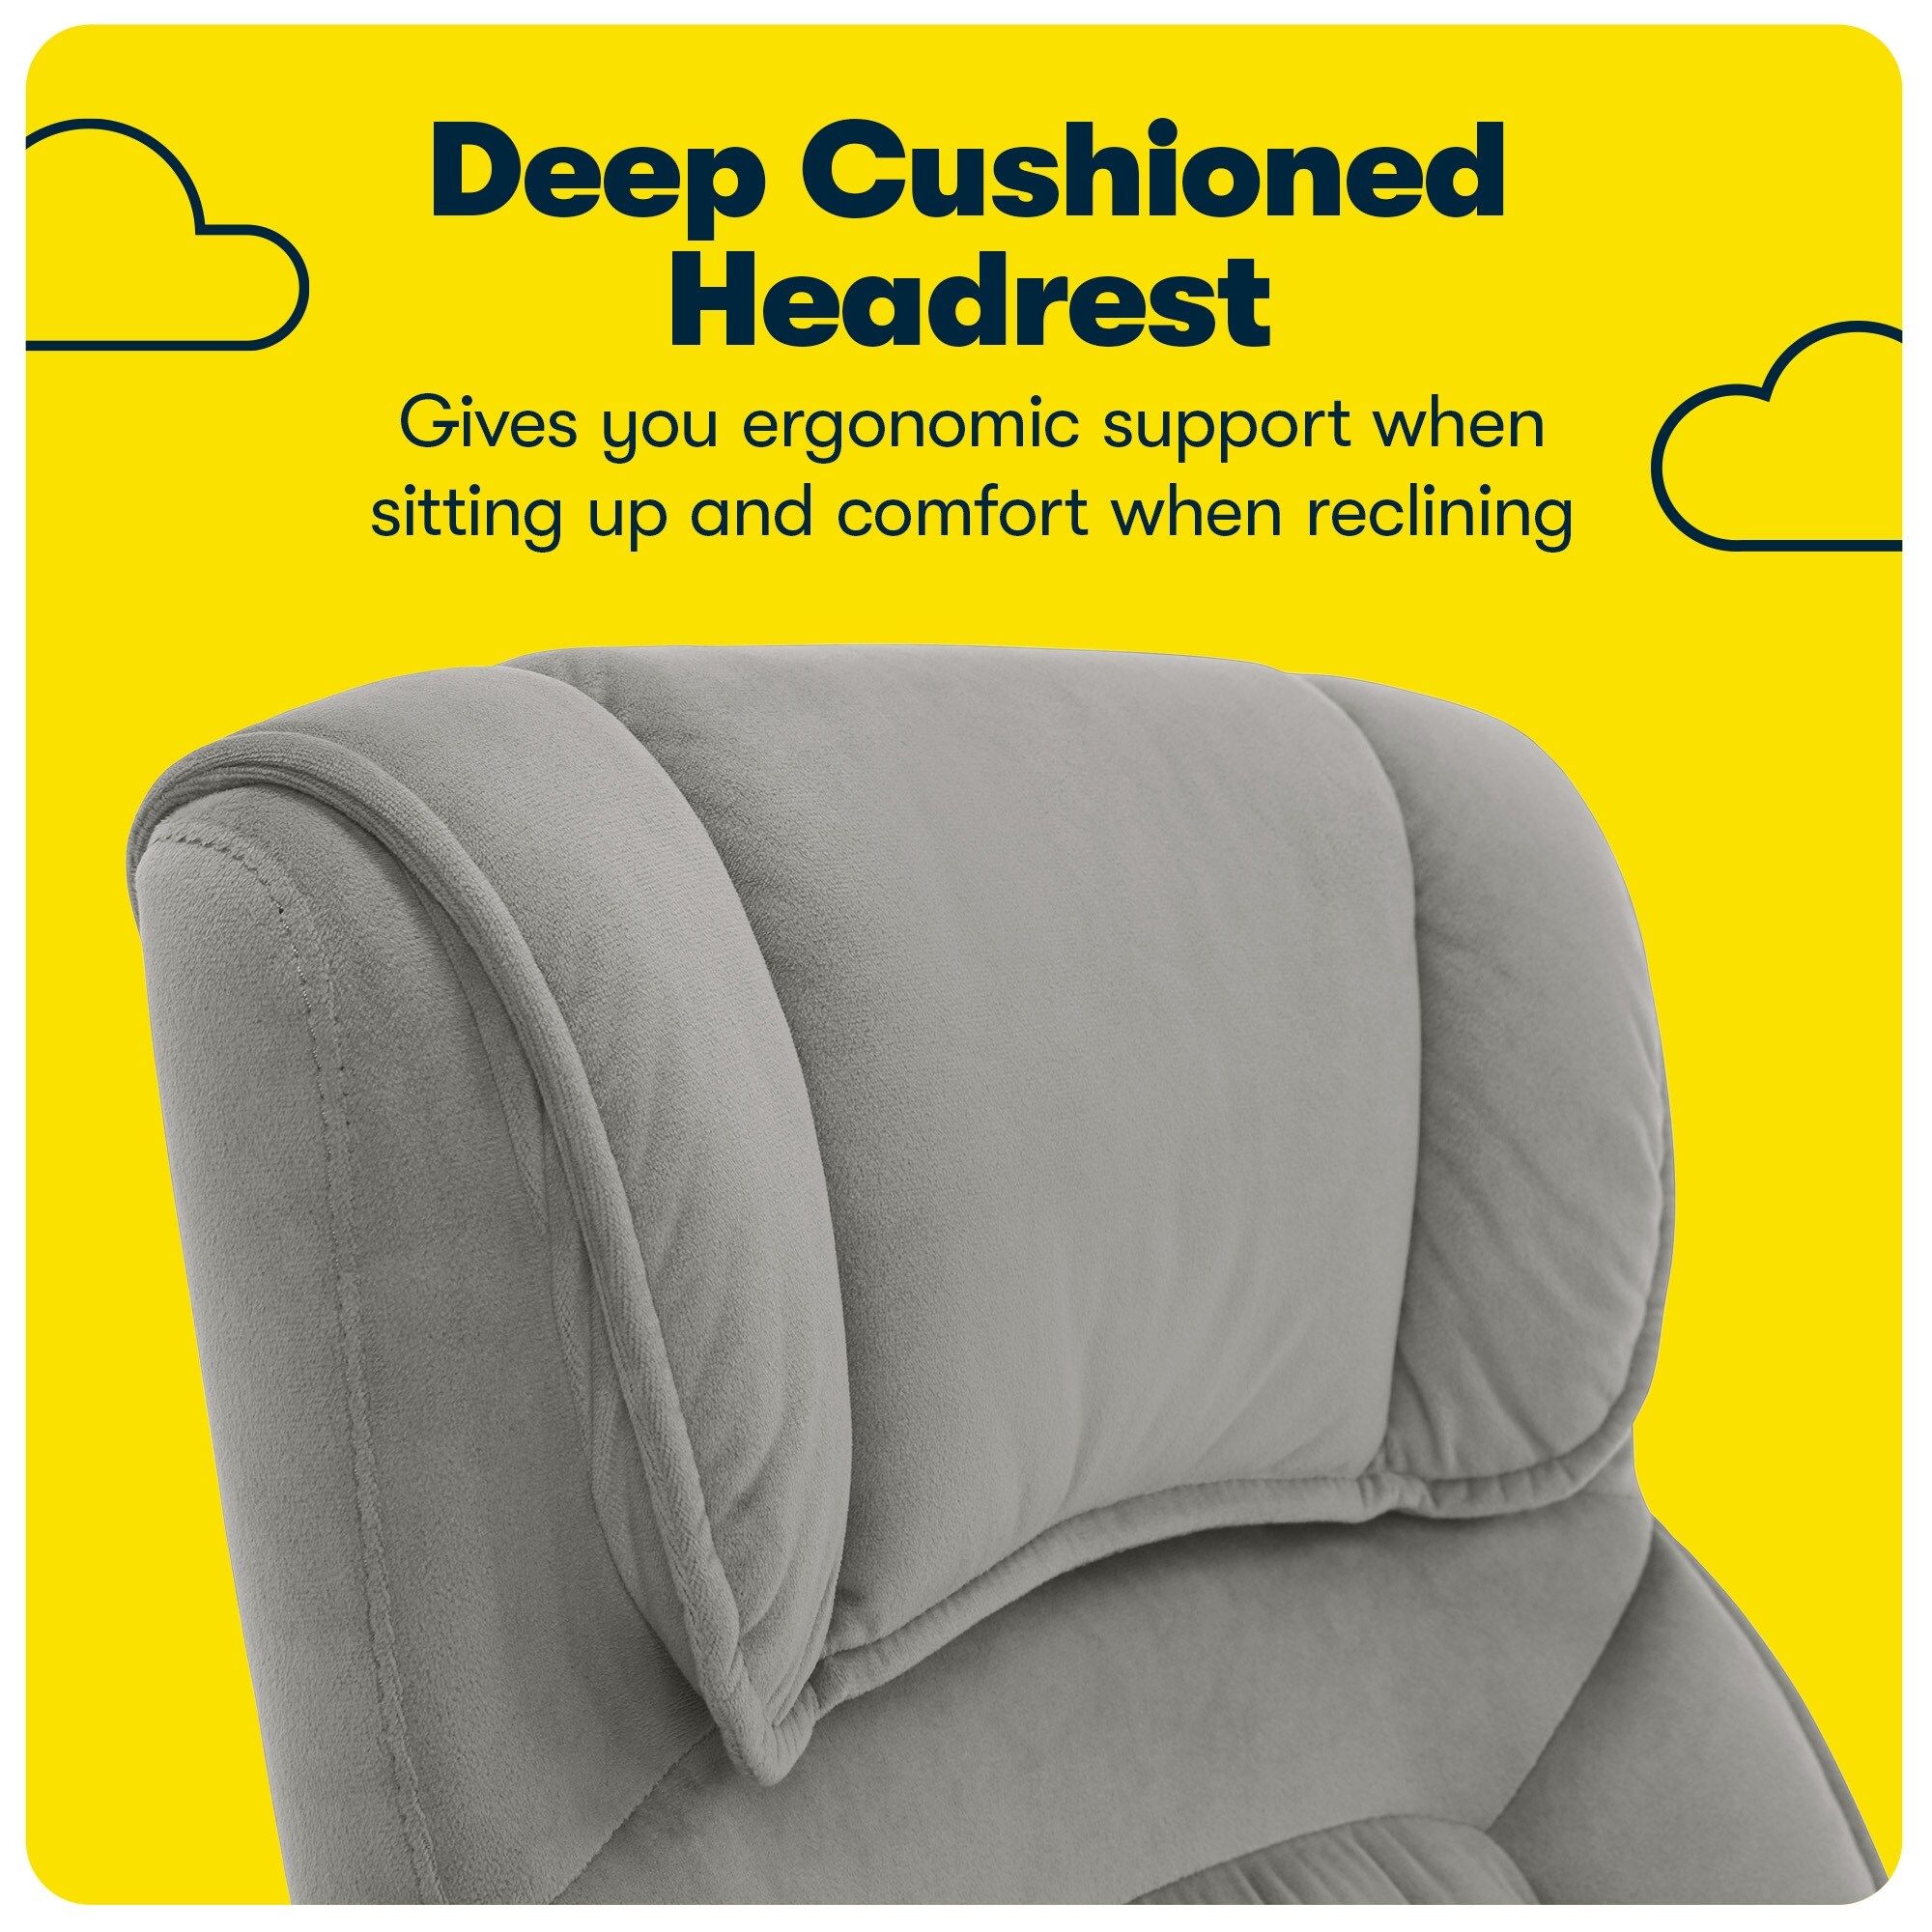 Best Buy: Serta Hannah Upholstered Executive Office Chair with Headrest  Pillow Charcoal Gray 43670D